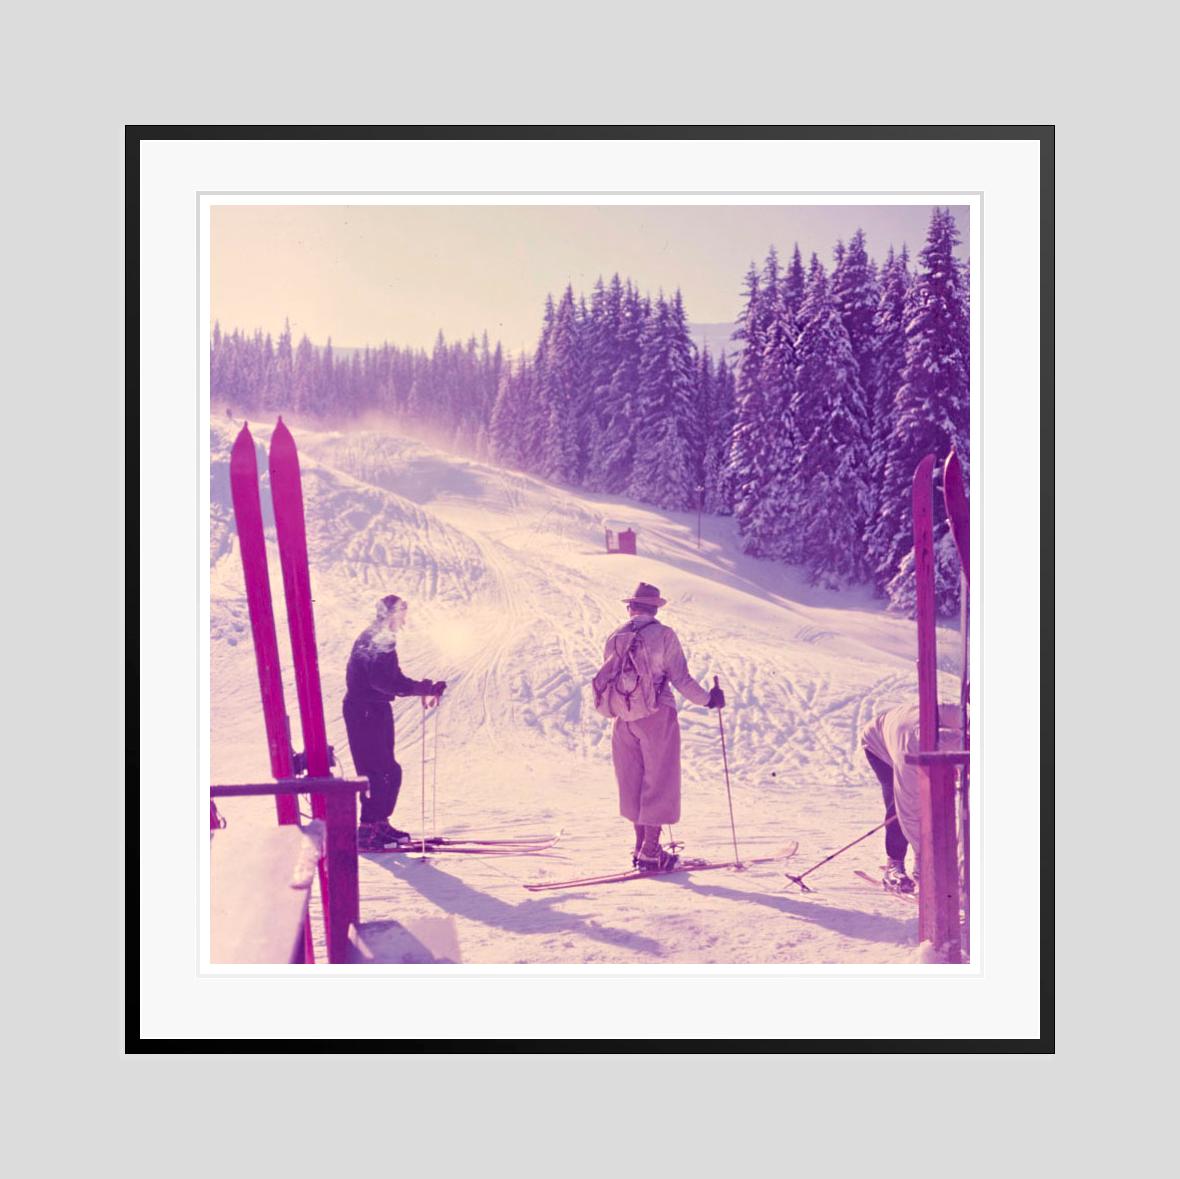 Mountain Top 

1954

Two skiers prepare to beging their descent, Klosters, Switzerland, 1954. (Toni Frissell)

by Toni Frissell

30 x 30